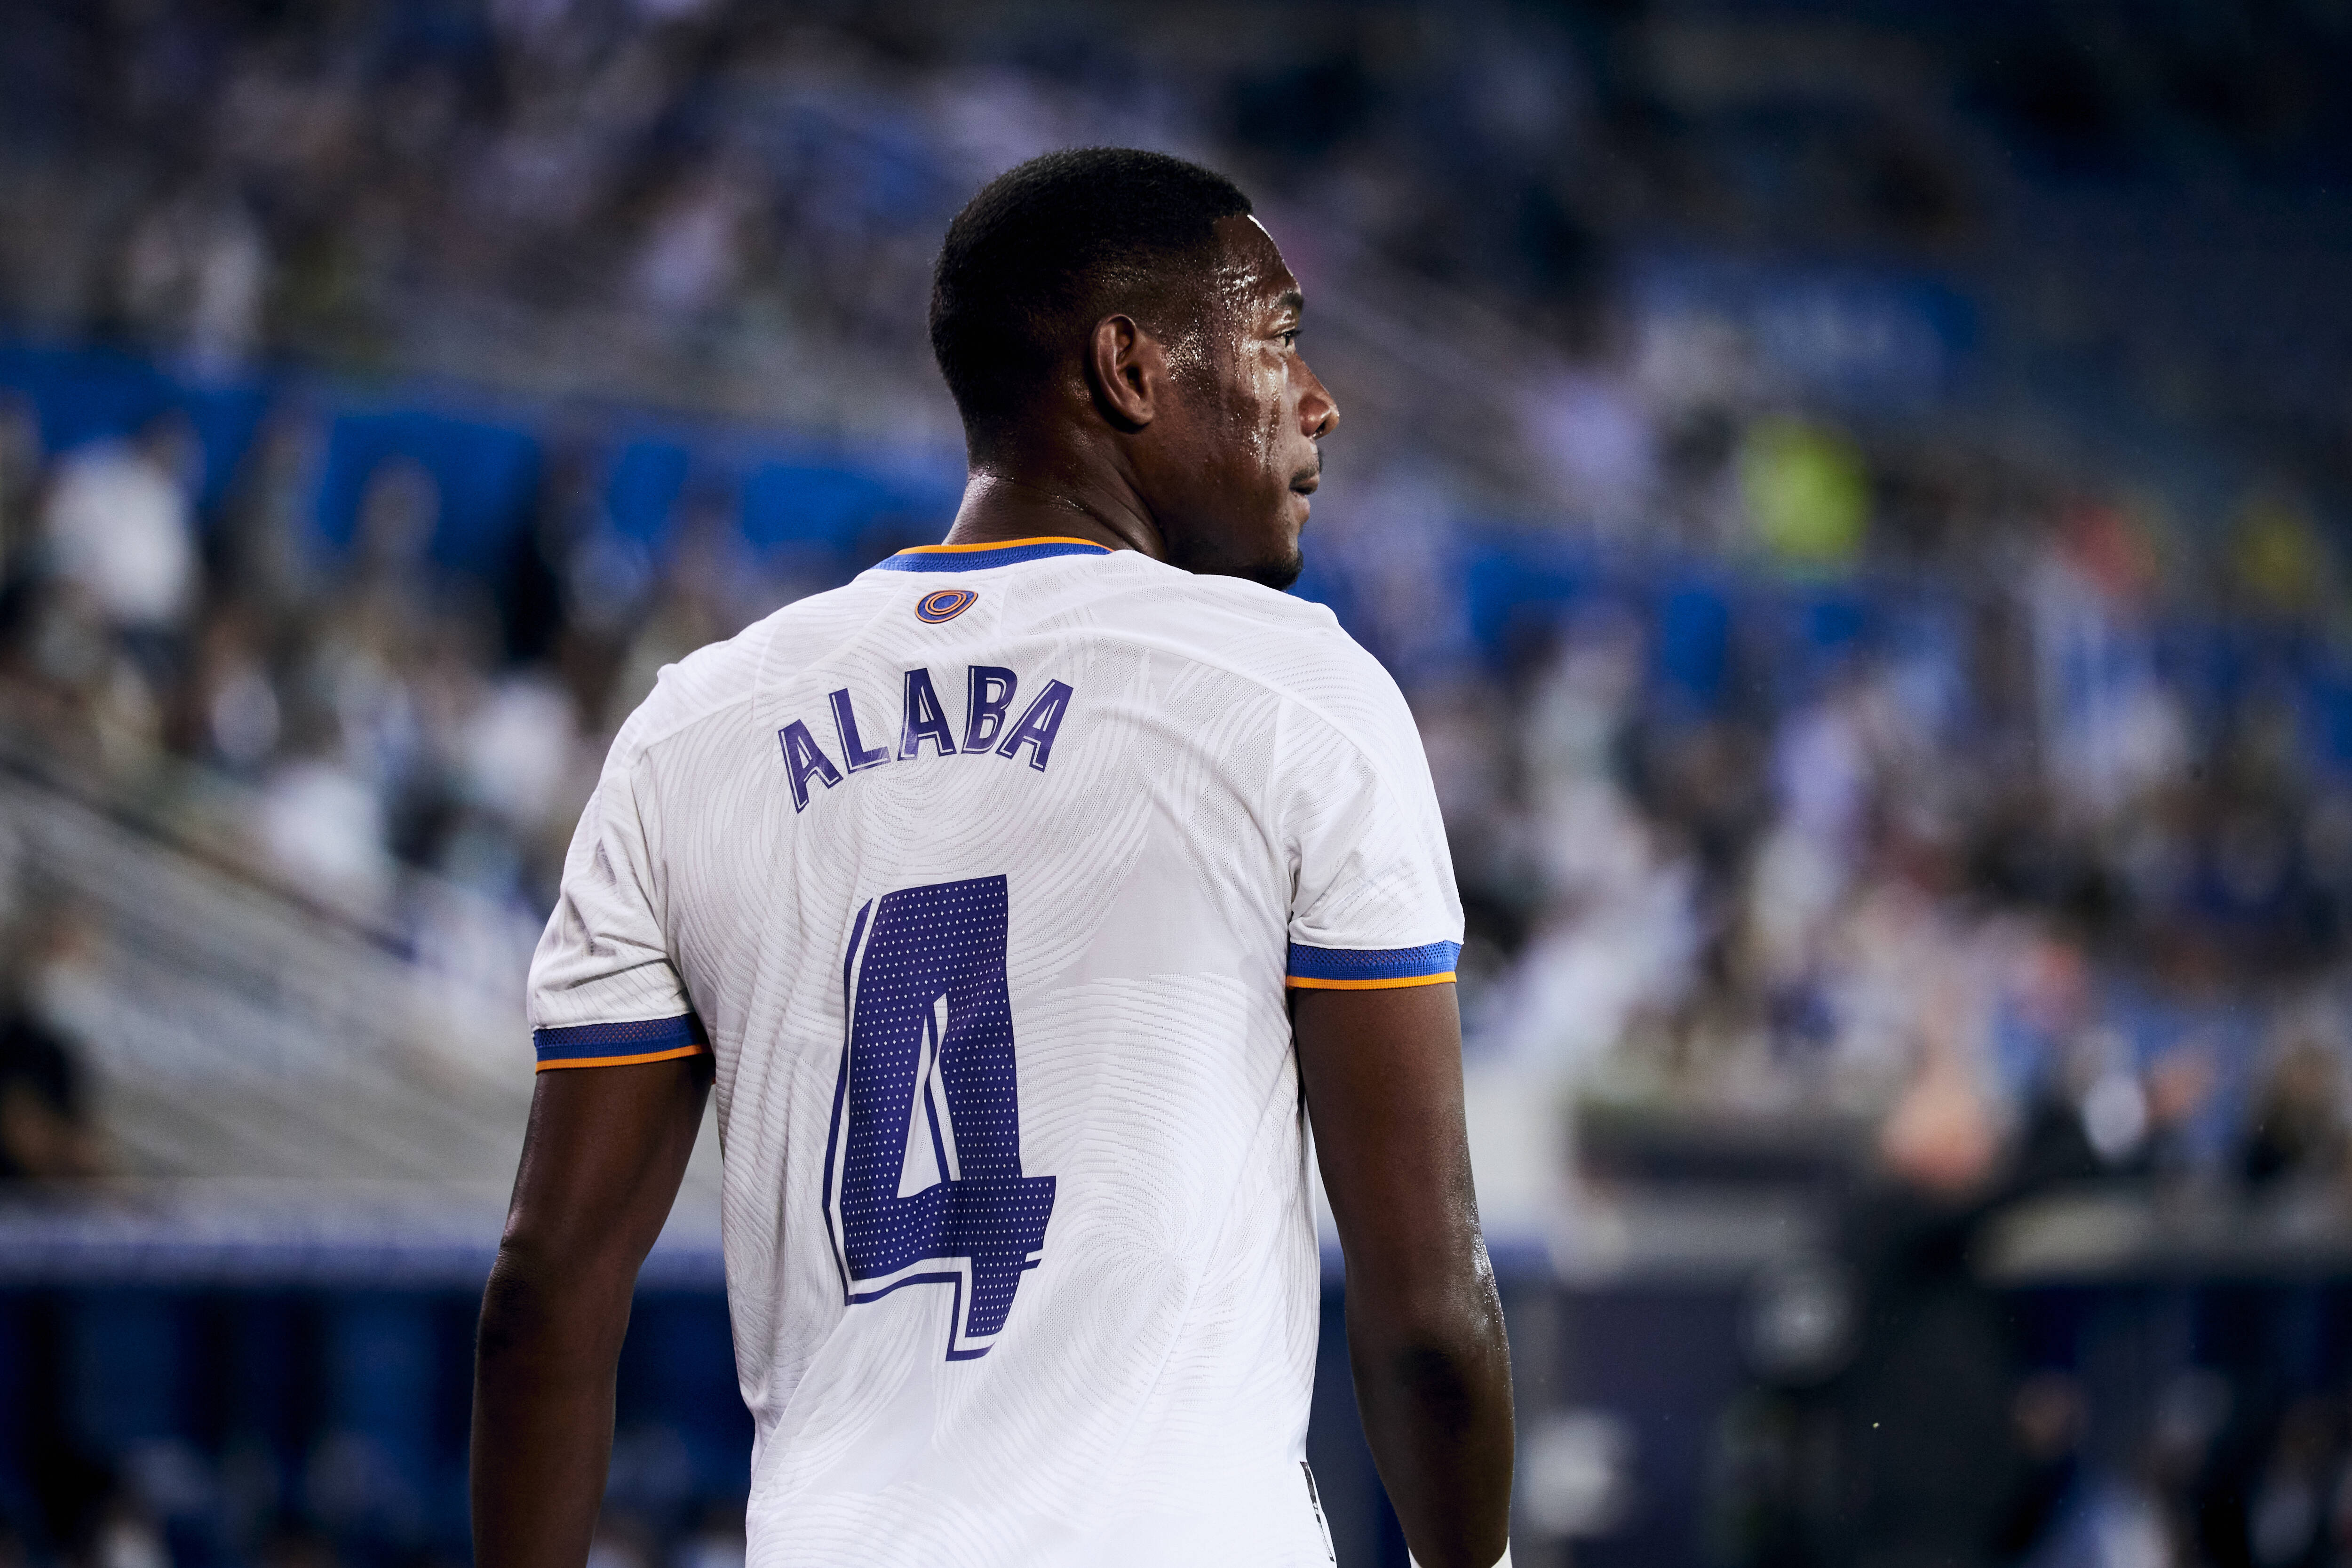 David Alaba has become an important player for Real Madrid